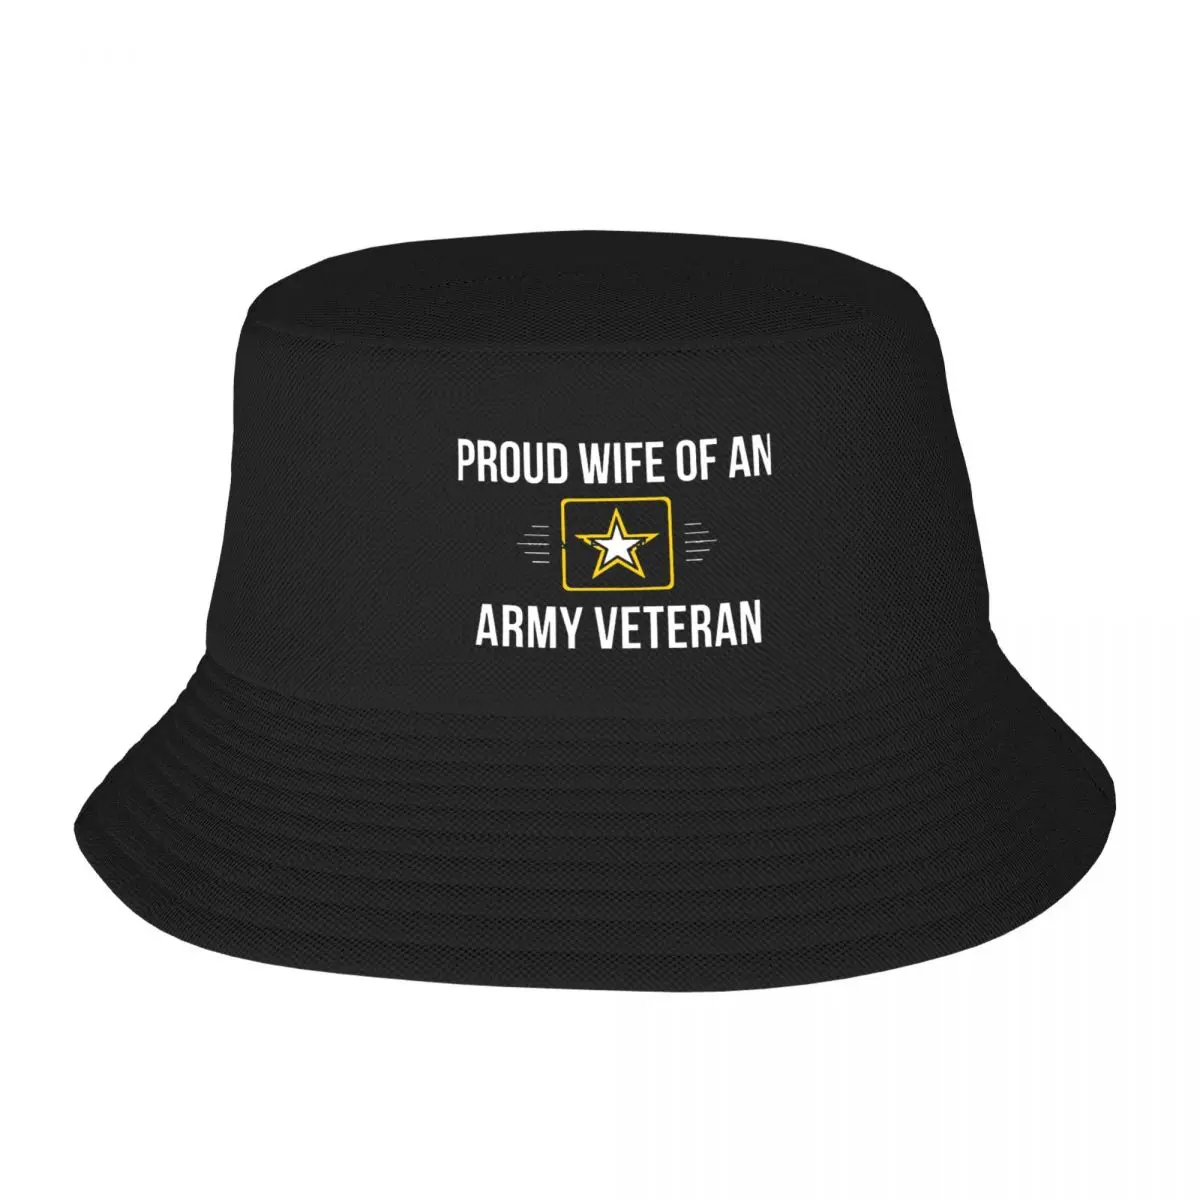 

Proud Wife Of An Army Veteran Fisherman's Hat, Adult Cap Fashionable Light For Daily Nice Gift